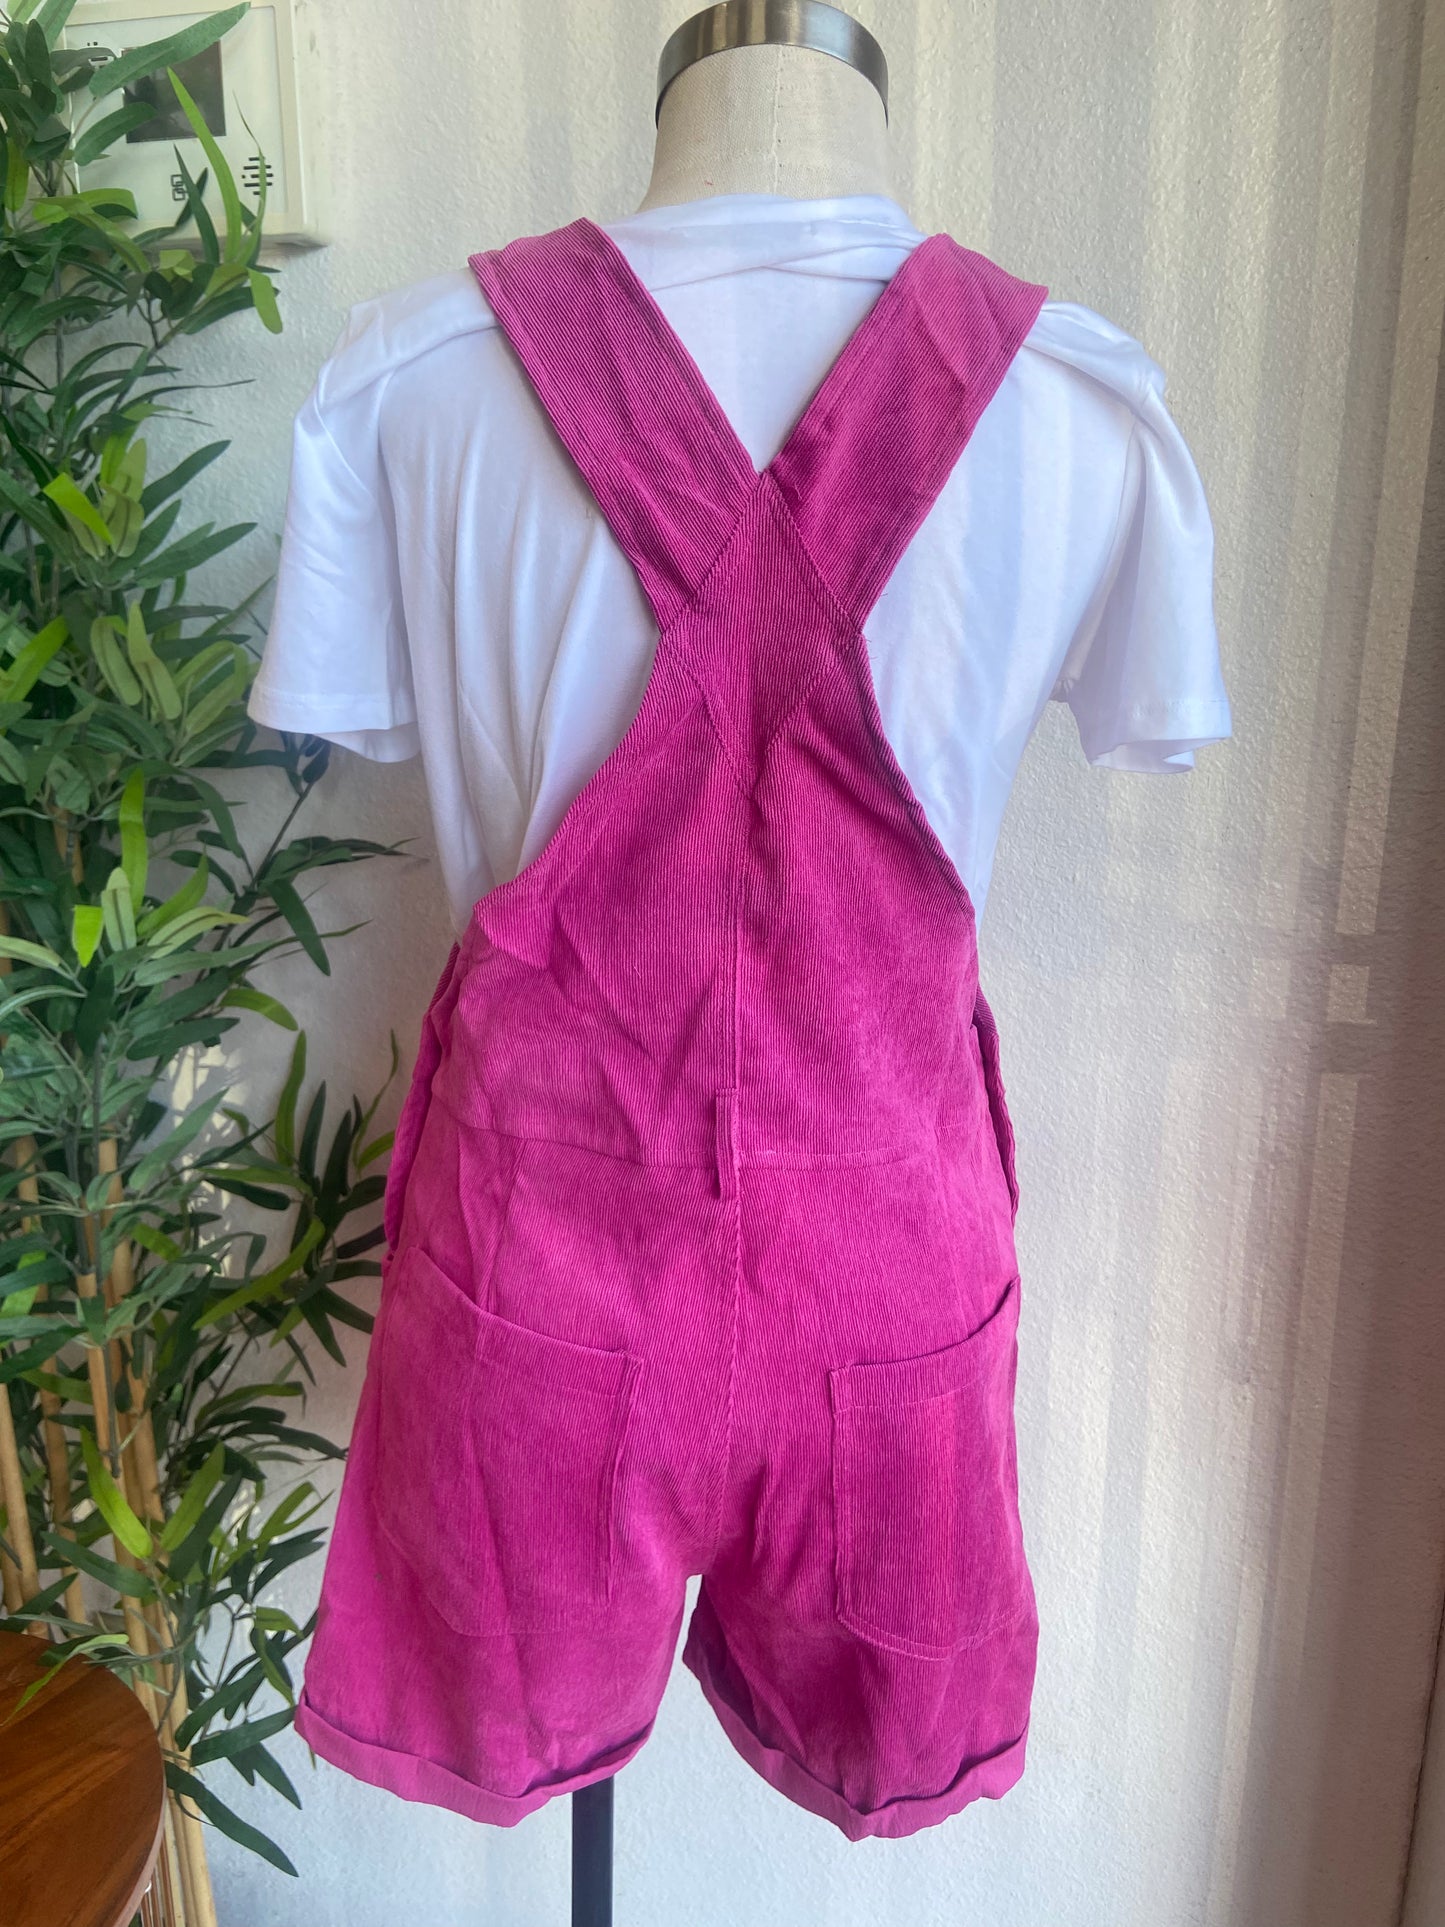 Leila Pink Overalls